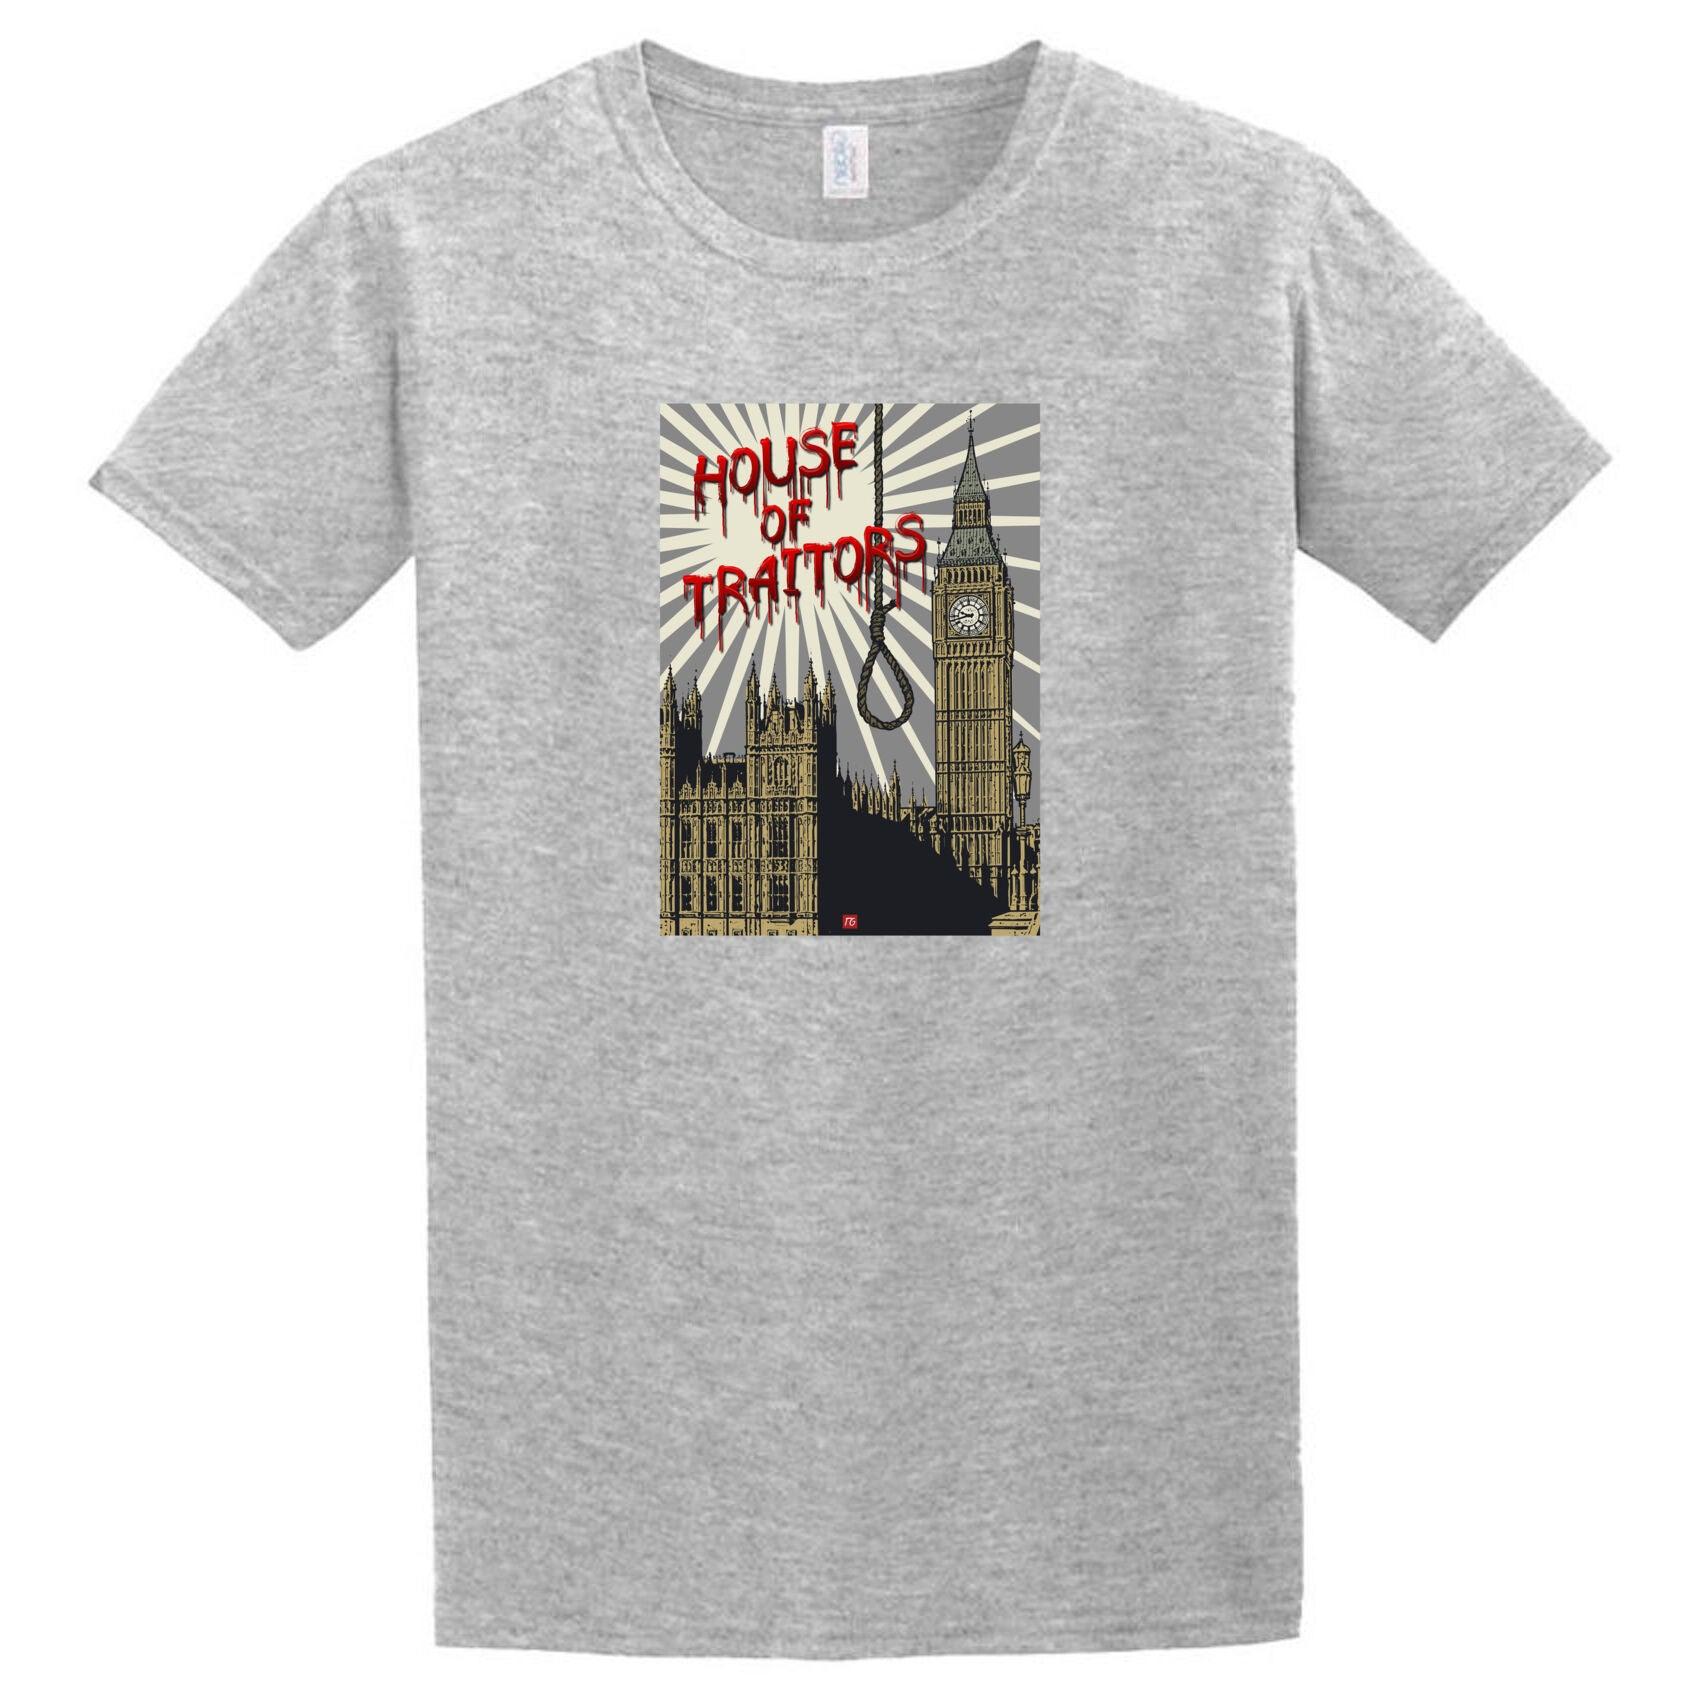 A Traitors T-Shirt from Twisted Gifts with an image of London's Big Ben.